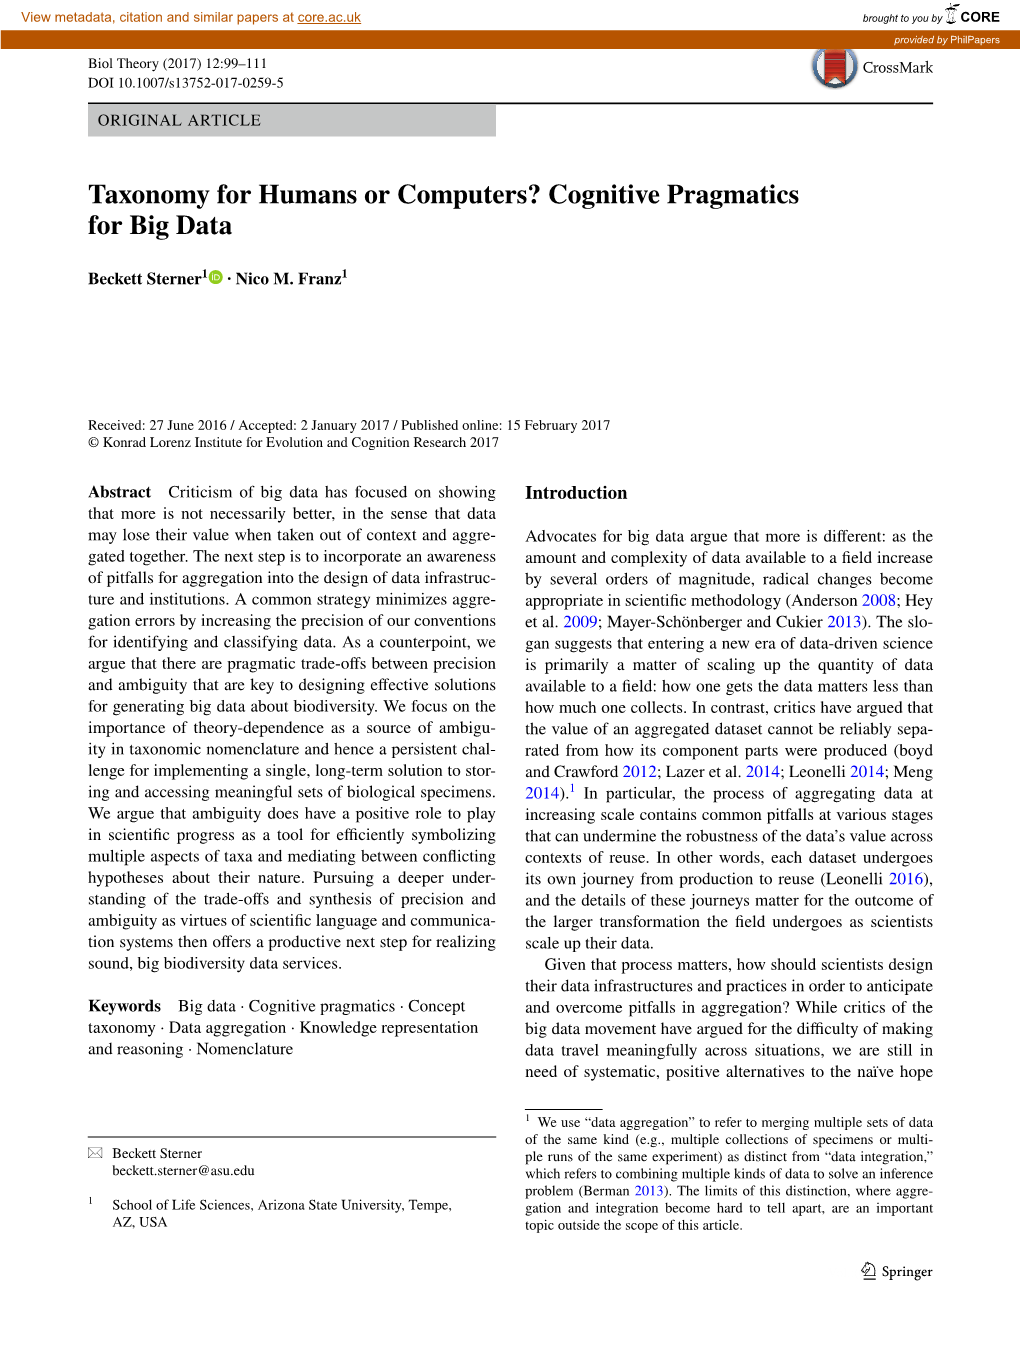 Taxonomy for Humans Or Computers? Cognitive Pragmatics for Big Data